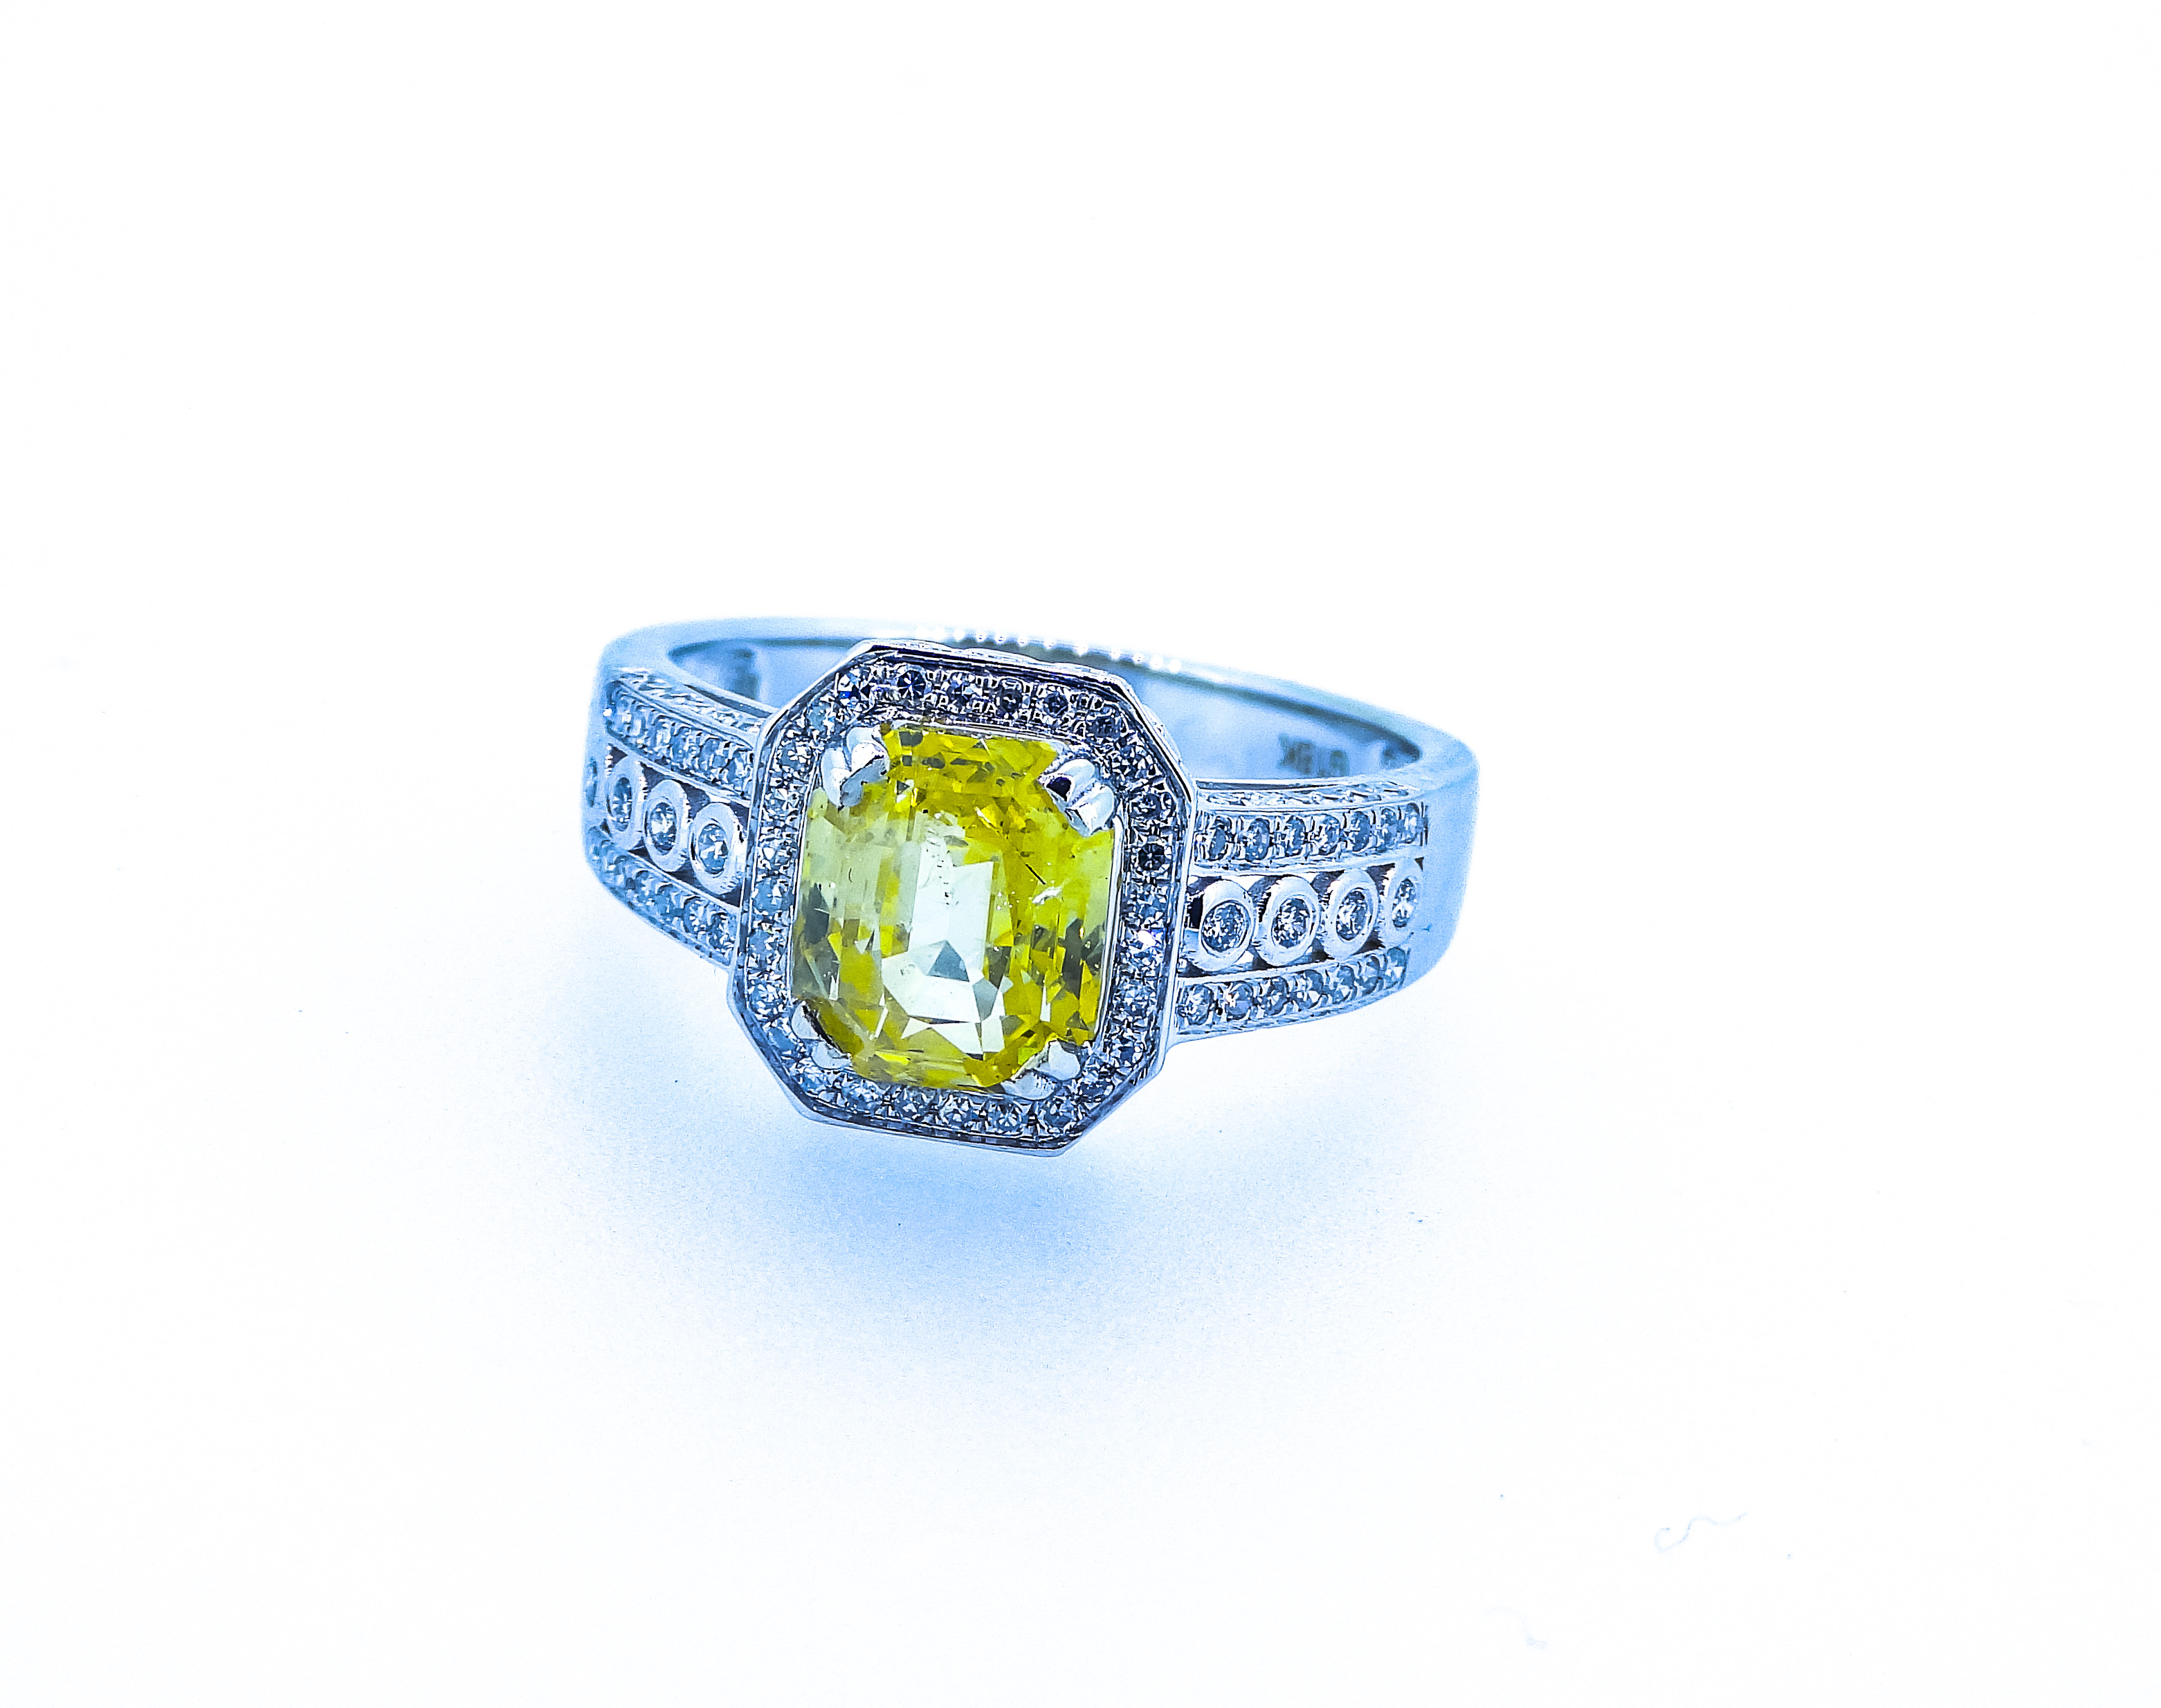 Certified 3.20 ct Yellow VVS Untreated Sapphire & Diamonds Ring - Image 3 of 7